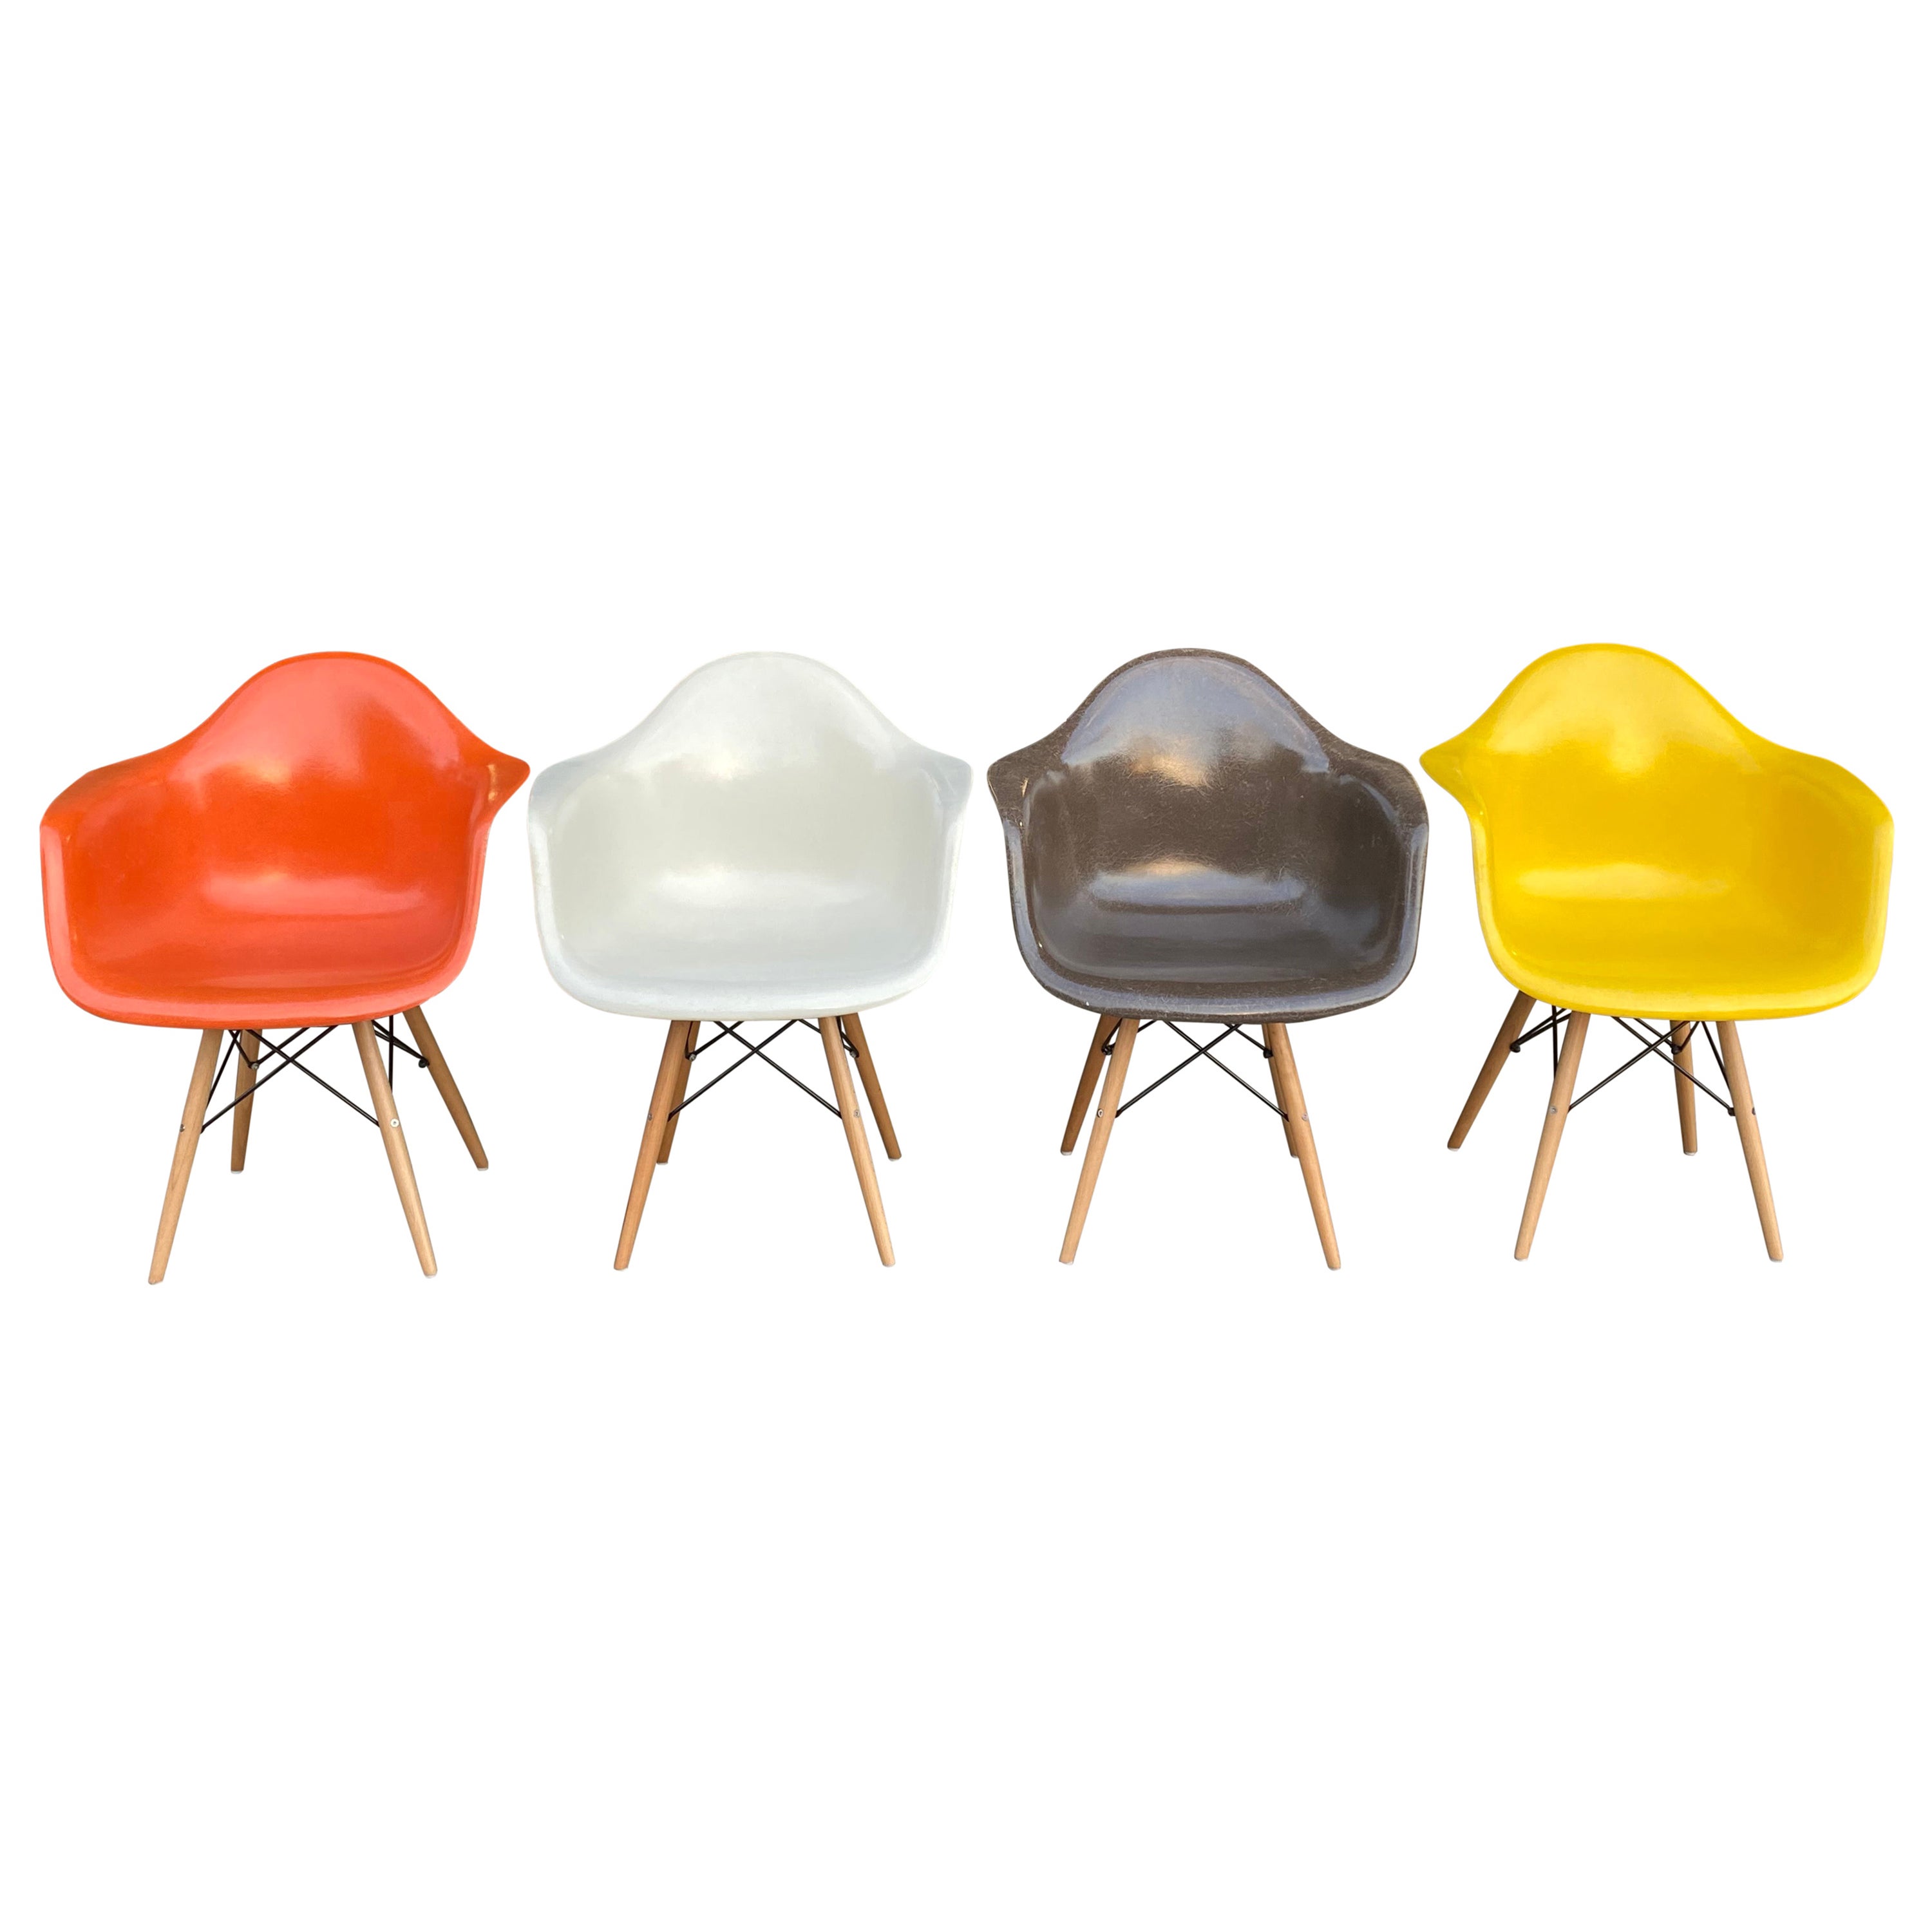 Multicolored Herman Miller Eames Dining Chair Set